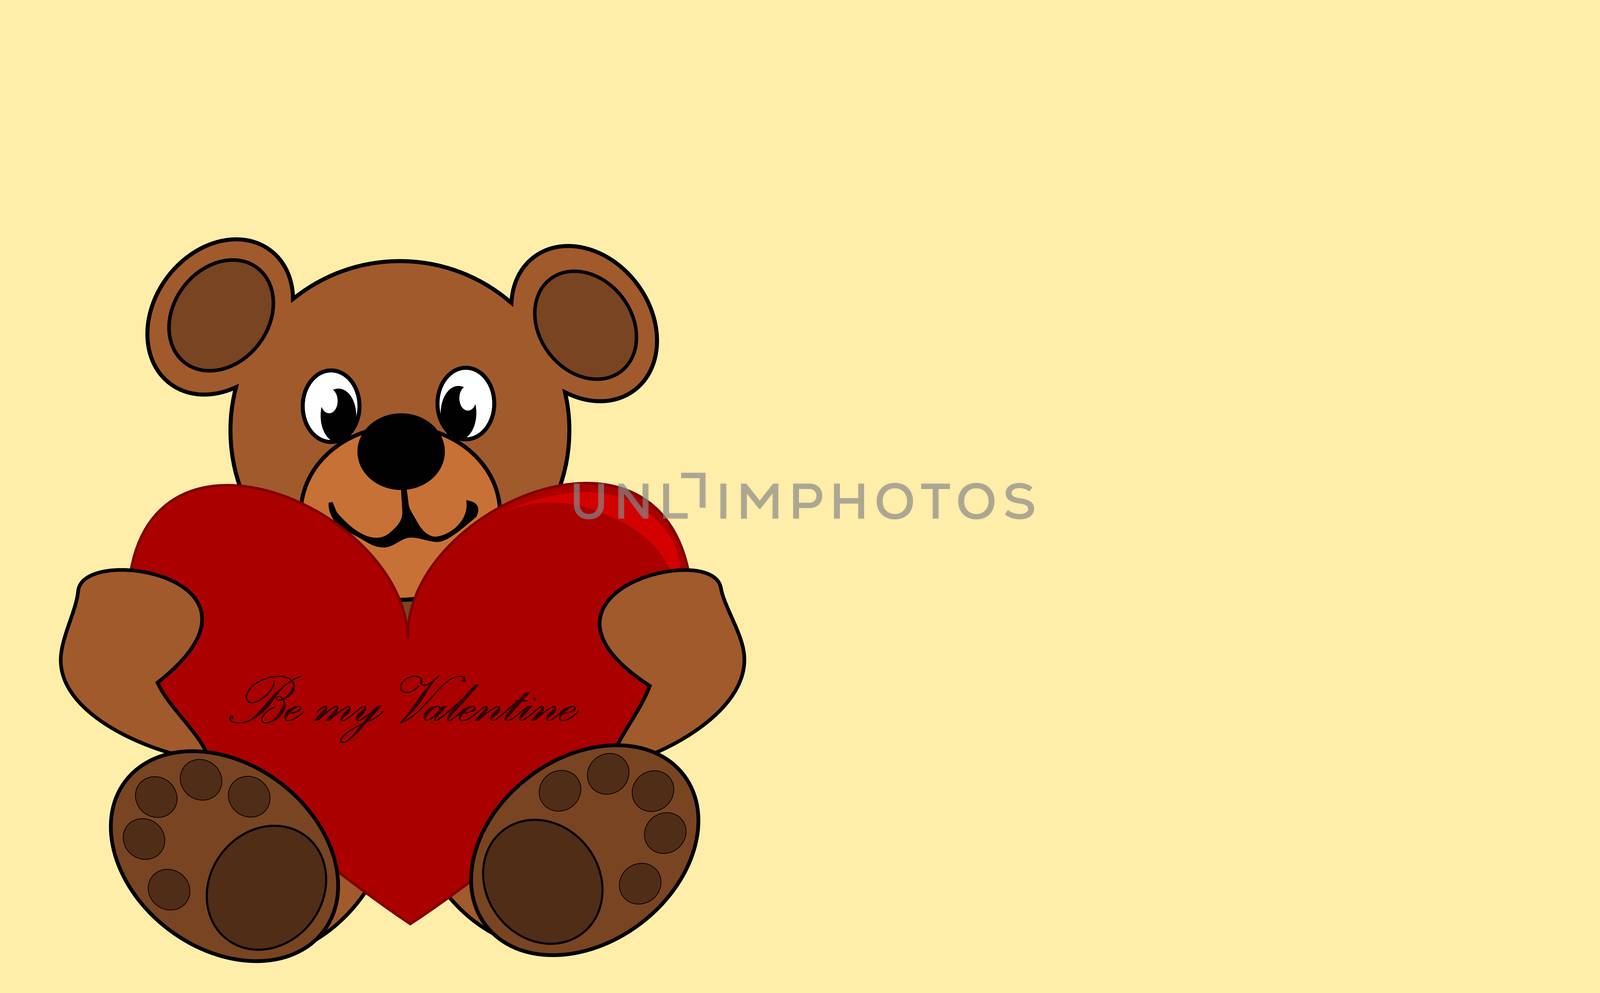 Be my Valentine - cute teddy bear with red heart by dedoma